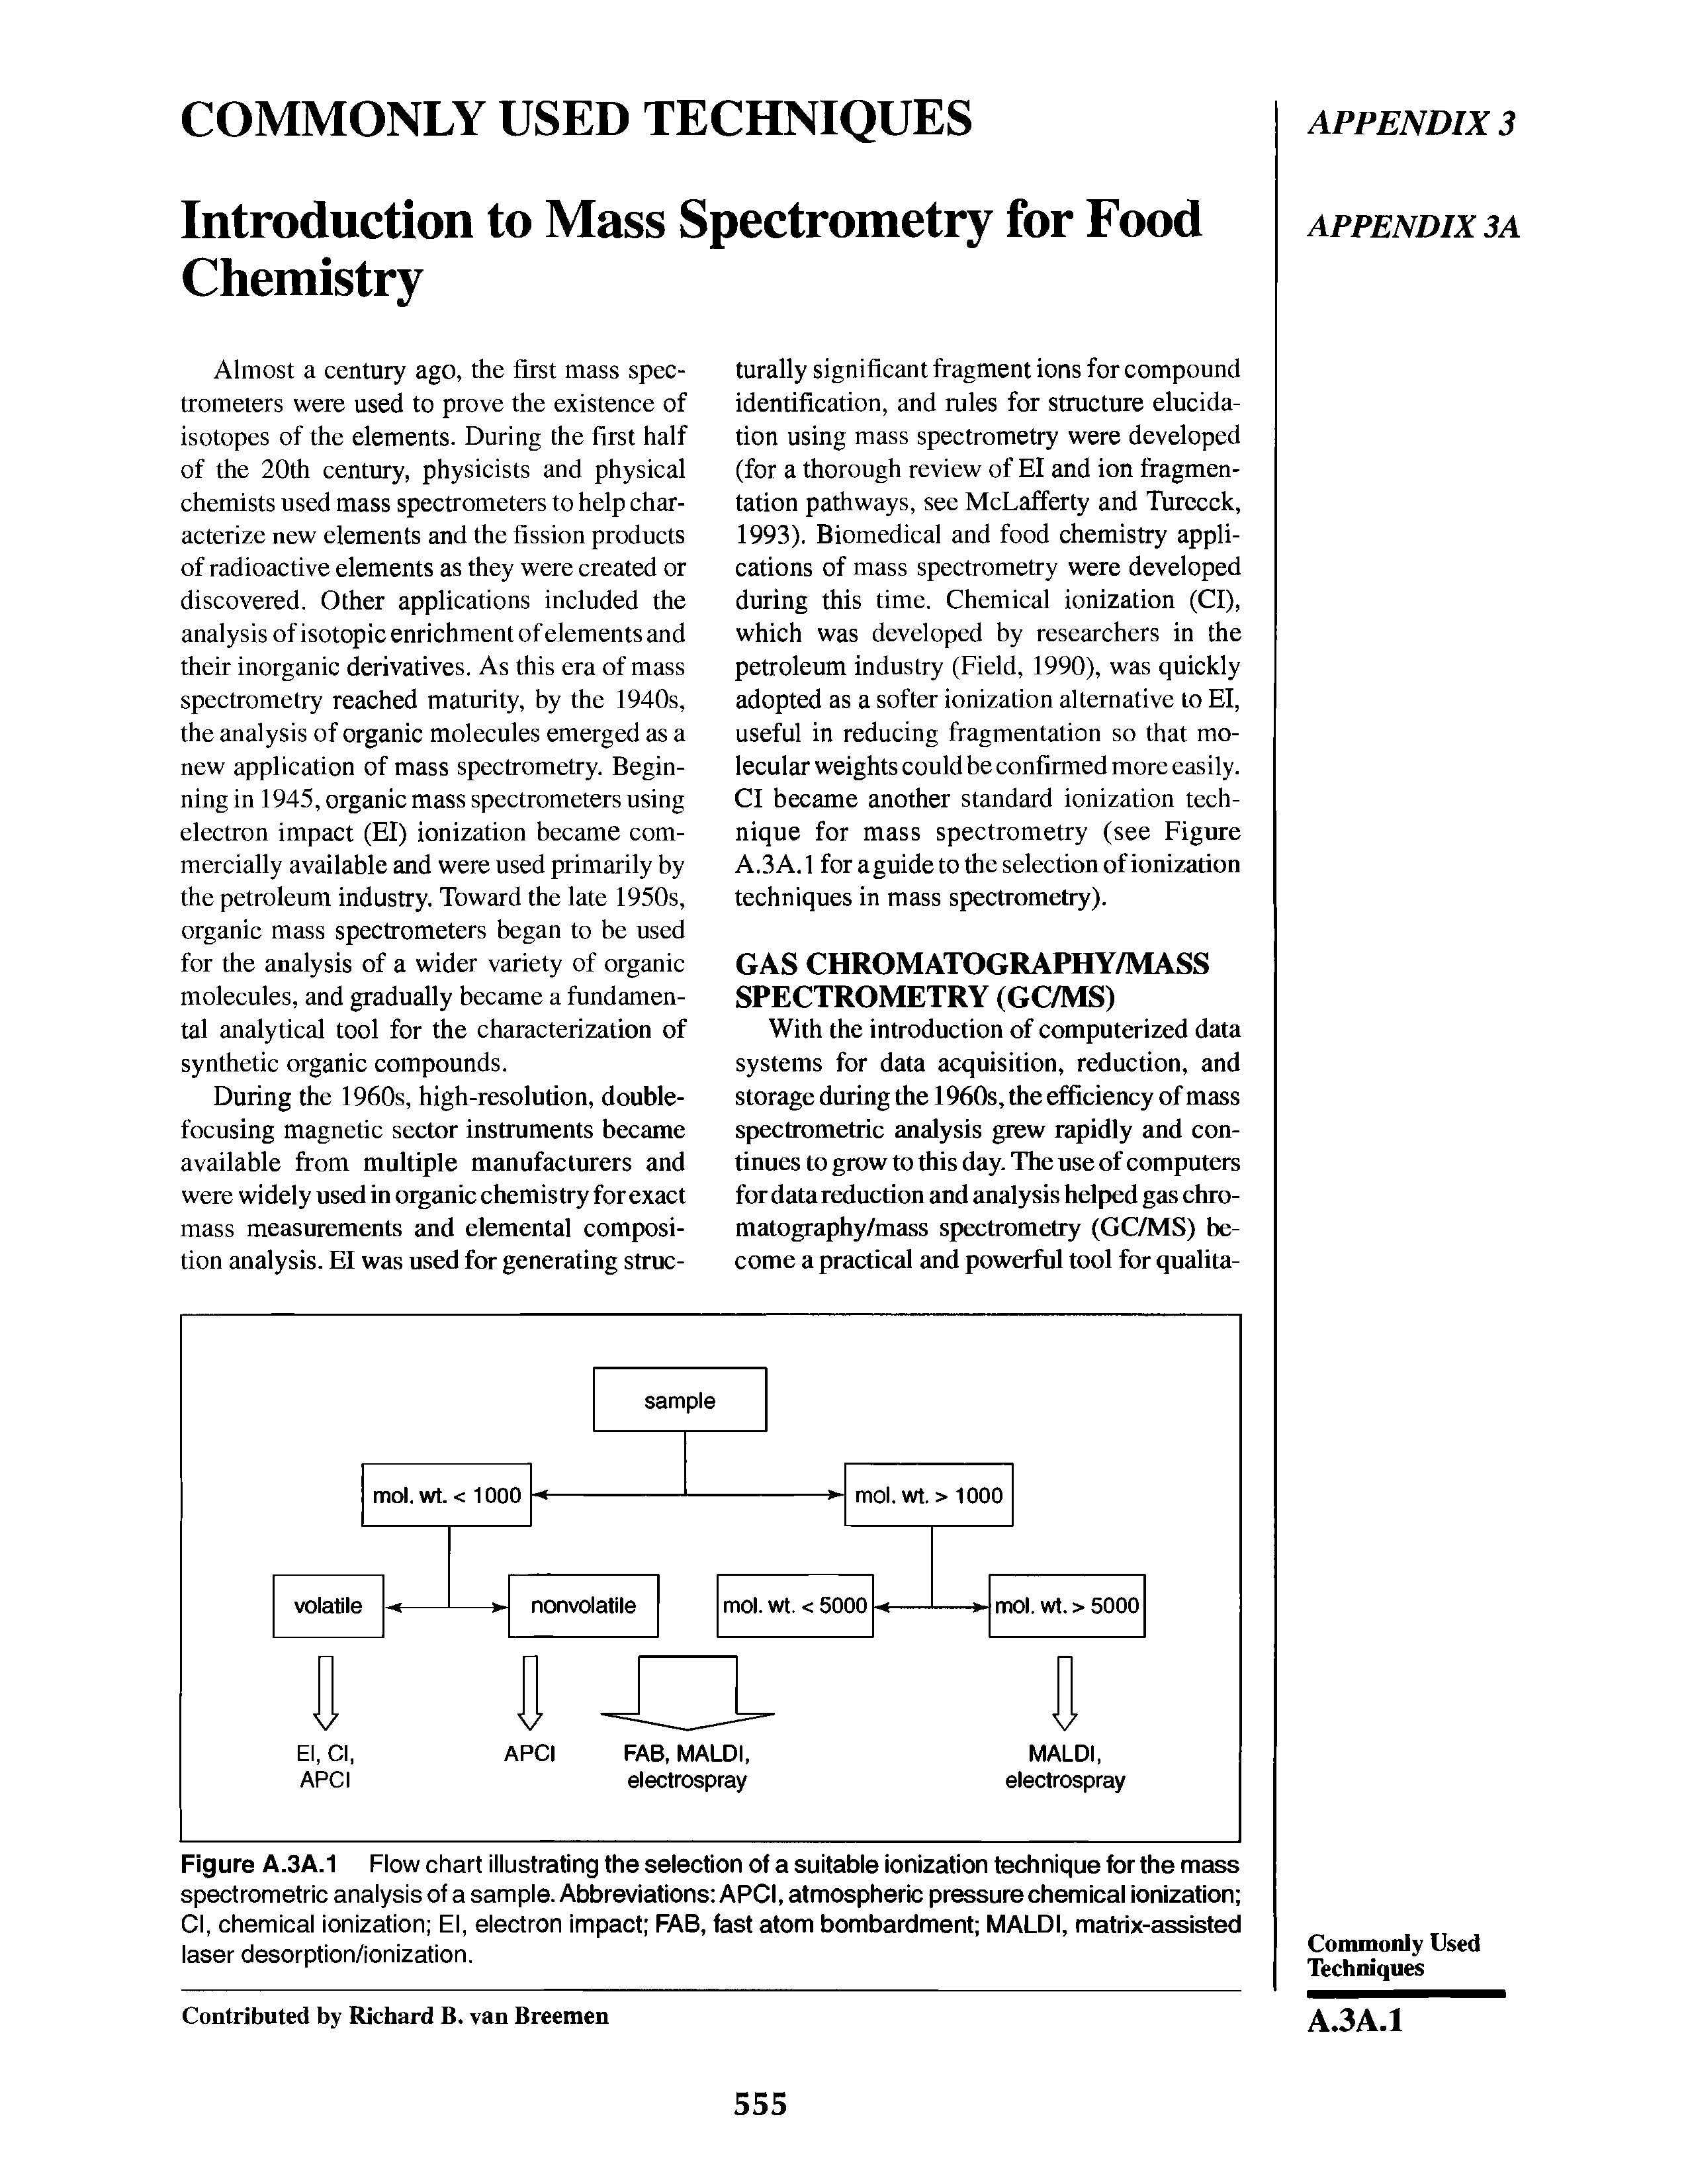 Figure A.3A.1 Flow chart illustrating the selection of a suitable ionization technique for the mass spectrometric analysis of a sample. Abbreviations APCI, atmospheric pressure chemical ionization Cl, chemical ionization El, electron impact FAB, fast atom bombardment MALDI, matrix-assisted laser desorption/ionization.